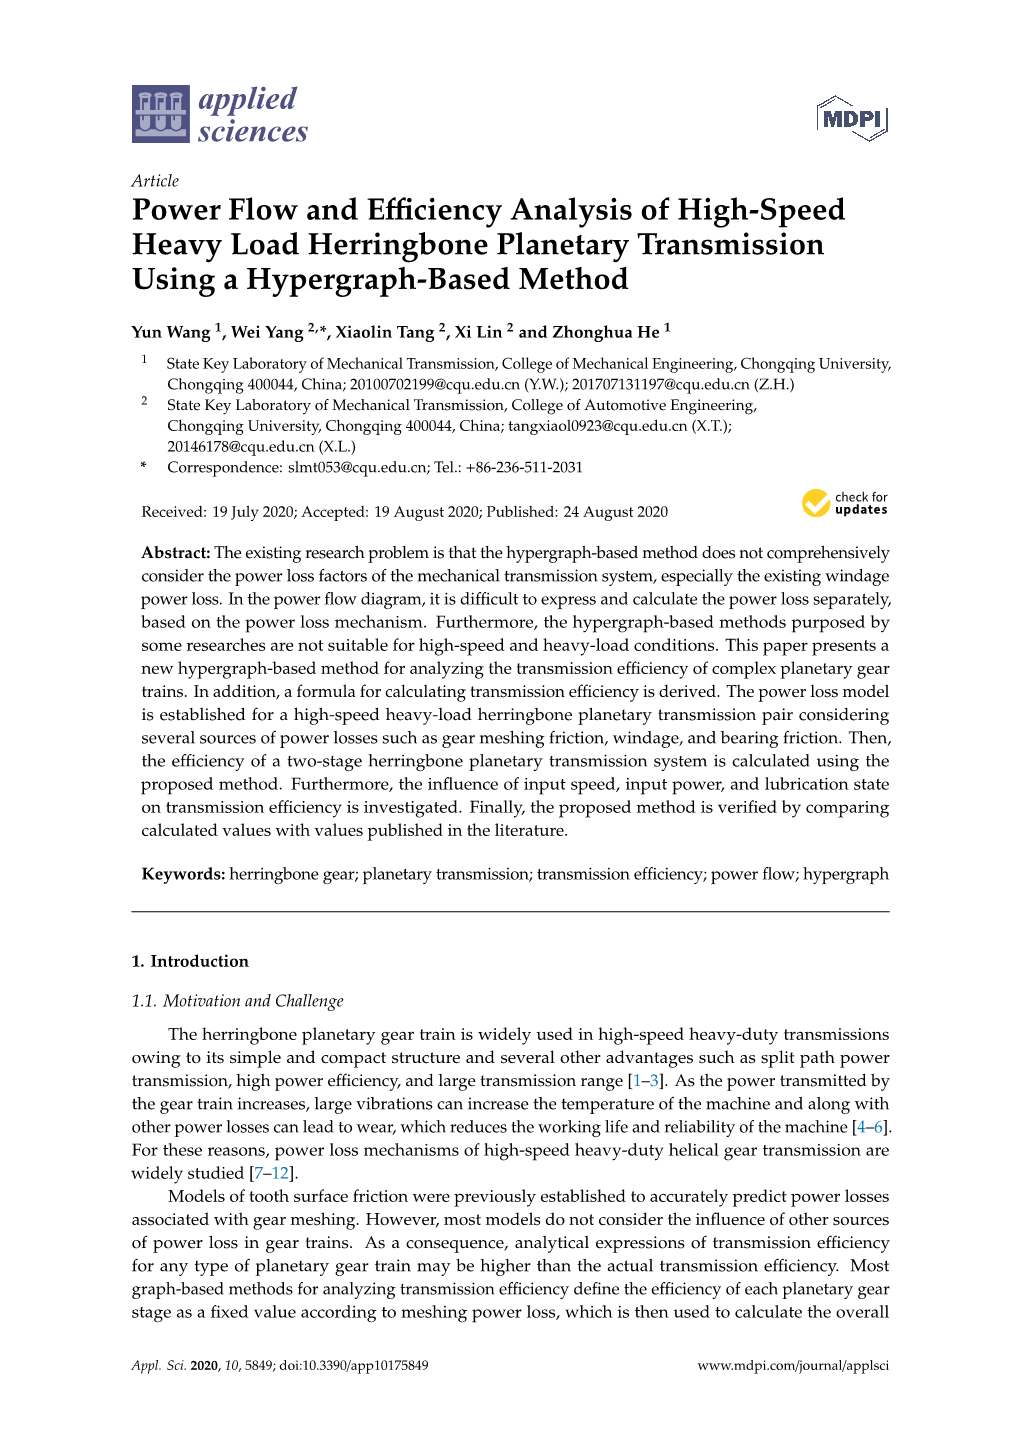 Power Flow and Efficiency Analysis of High-Speed Heavy Load Herringbone Planetary Transmission Using a Hypergraph-Based Method